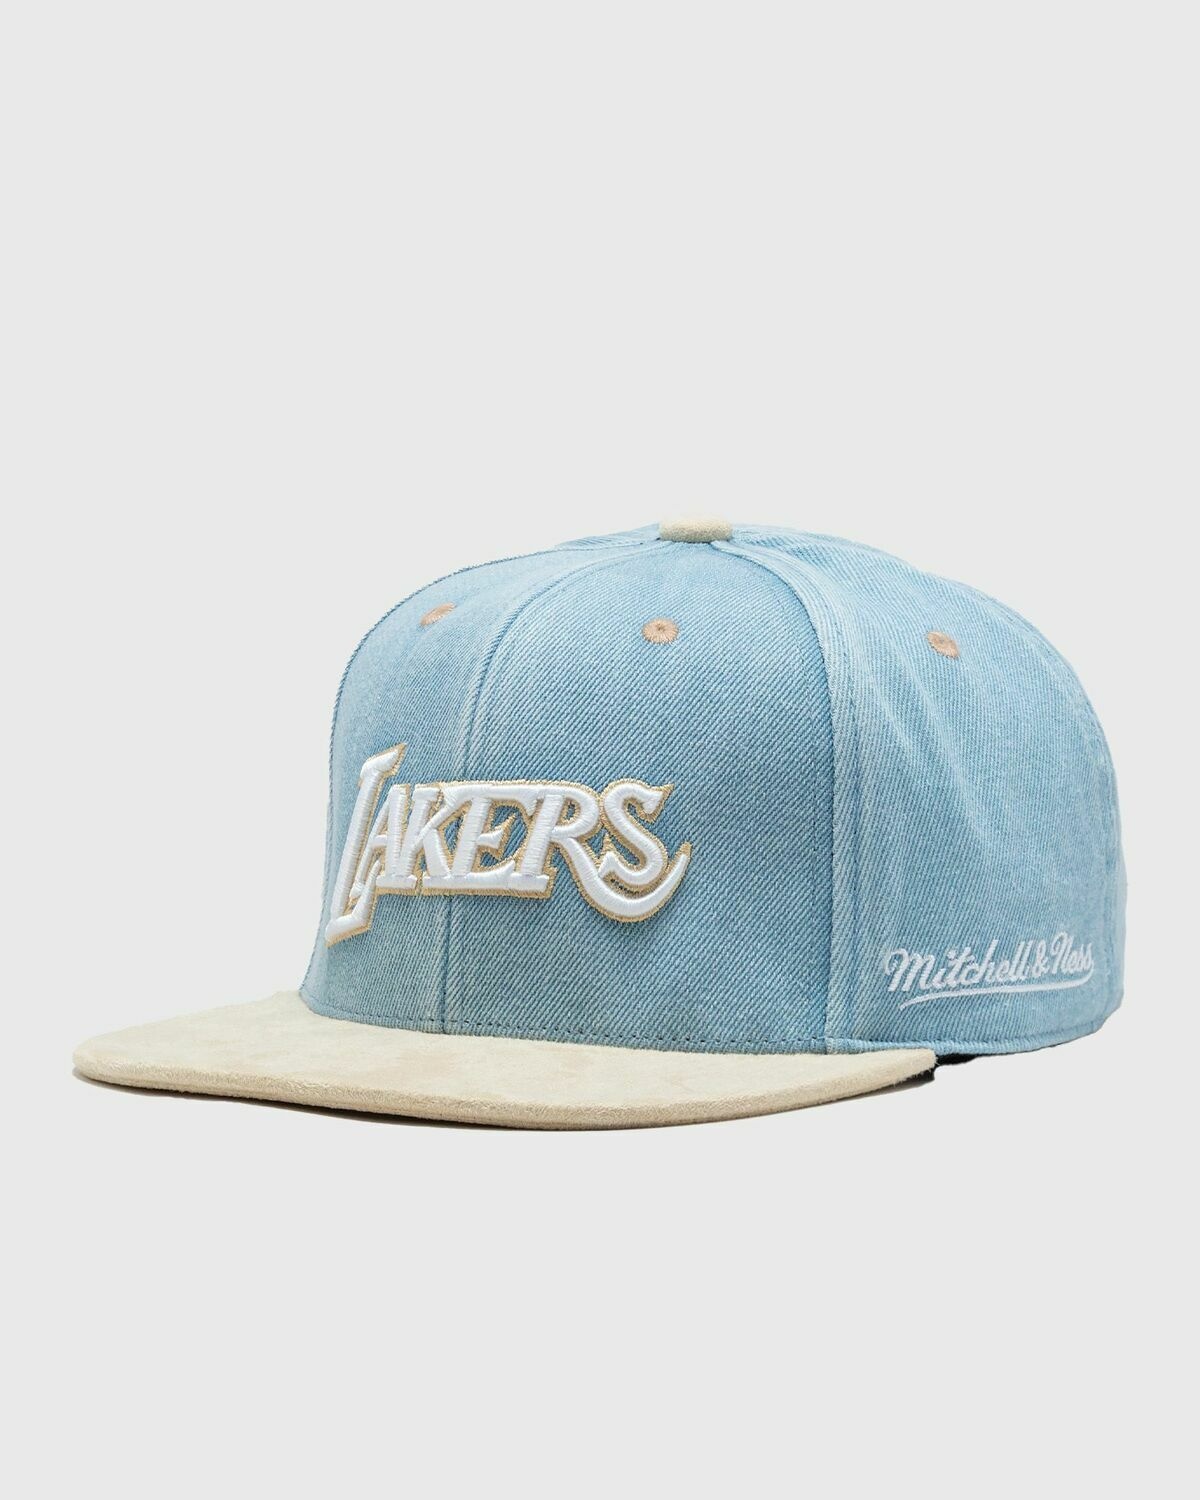 Mitchell & Ness Nba Blue Jean Baby Fitted Hwc Lakers Blue/Beige - Mens - Caps